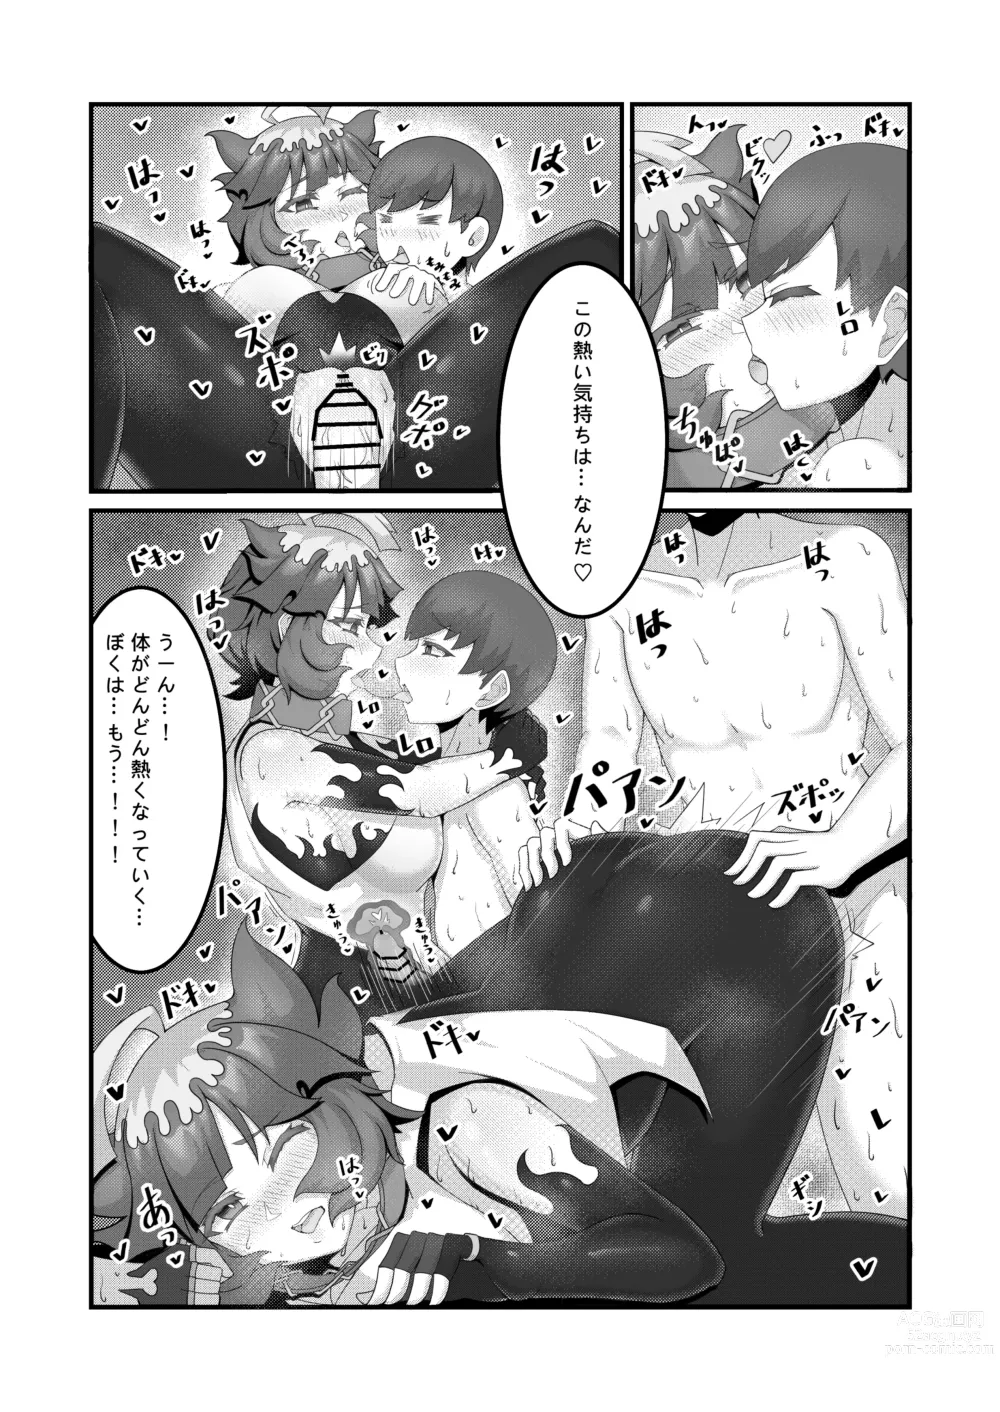 Page 7 of doujinshi Sex after Versus - Meloco 2